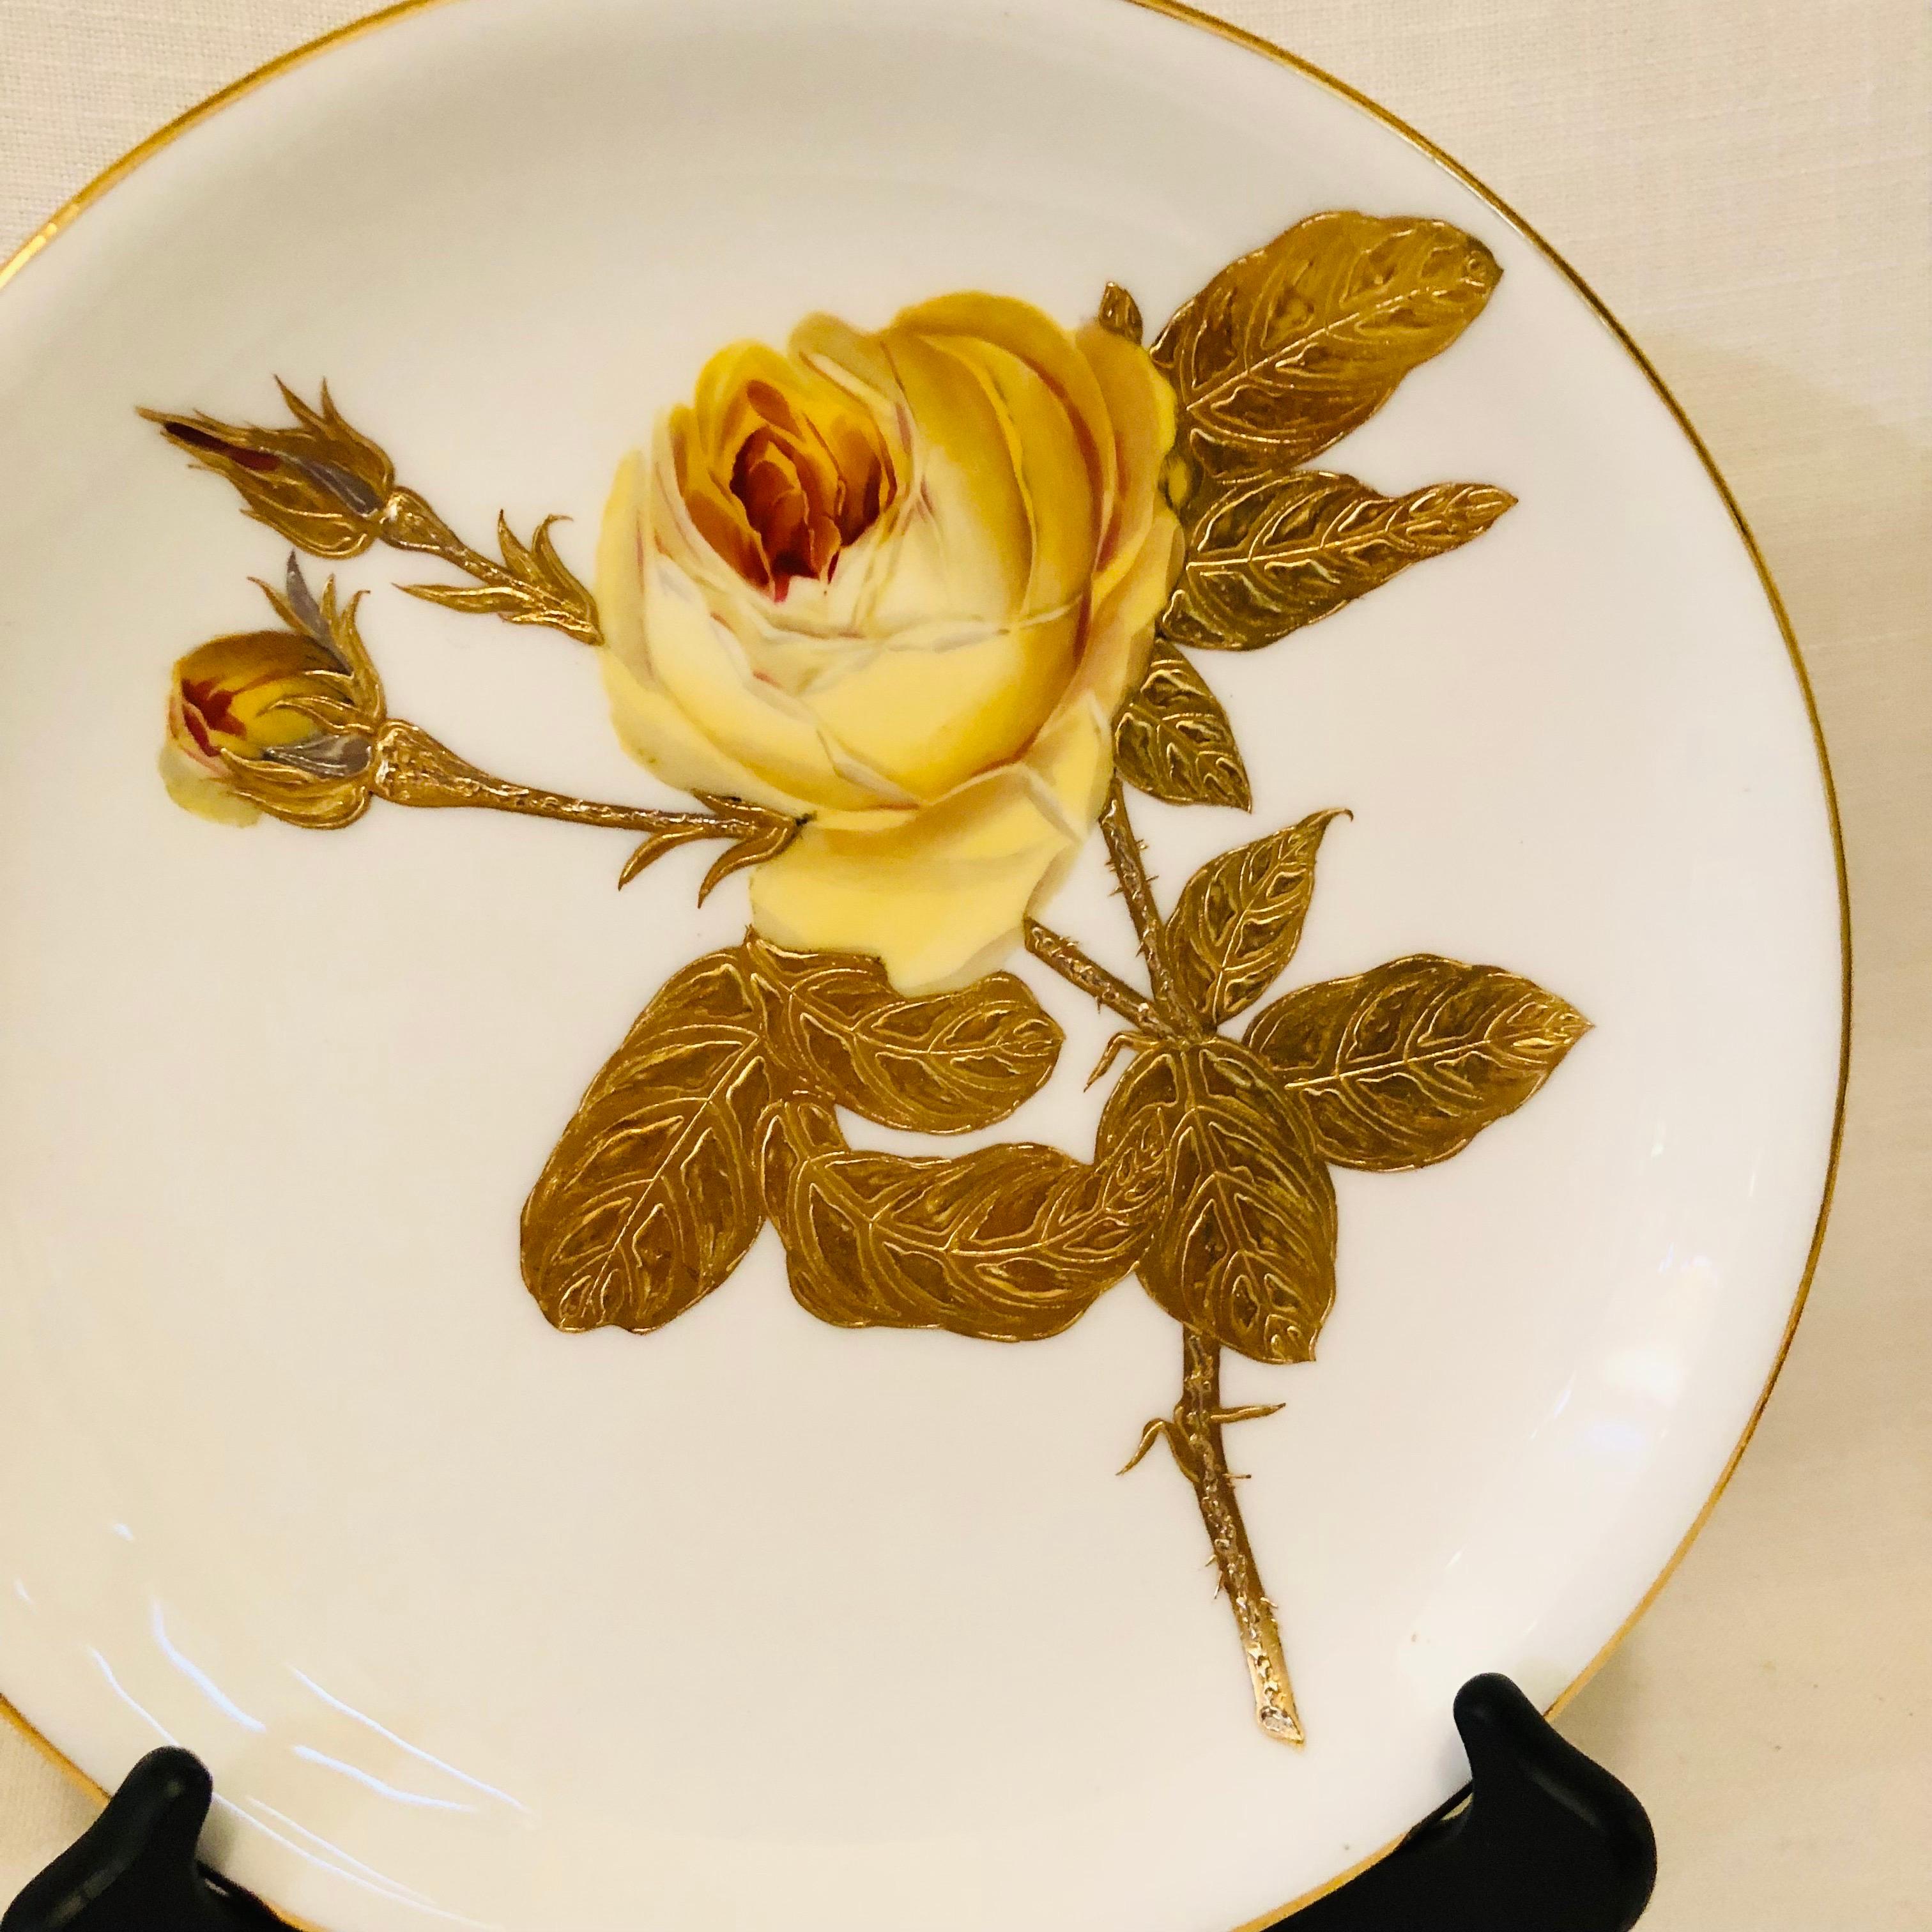 Minton Plates Each Painted With a Different Rose With Gold and Platinum Accents 6